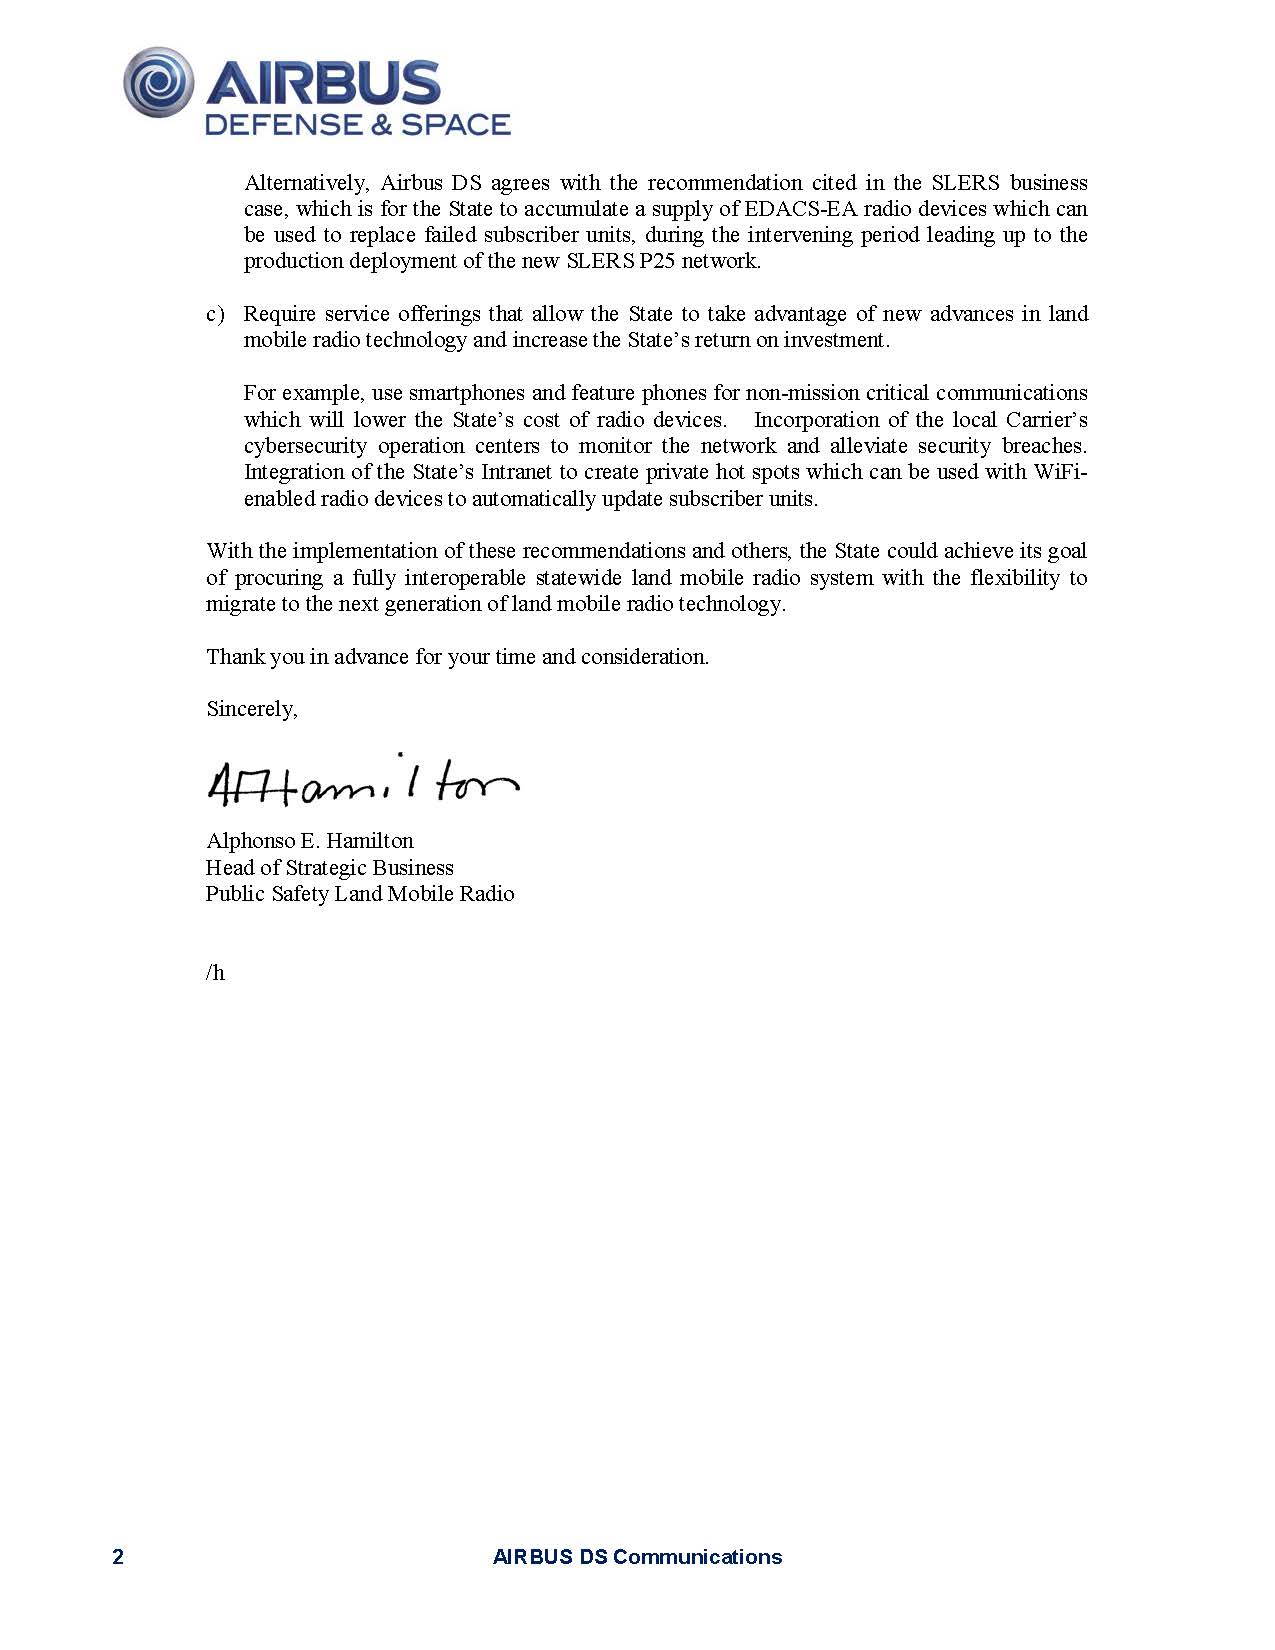 Letter Florida JTF Chairman Perez Airbus_Page_2